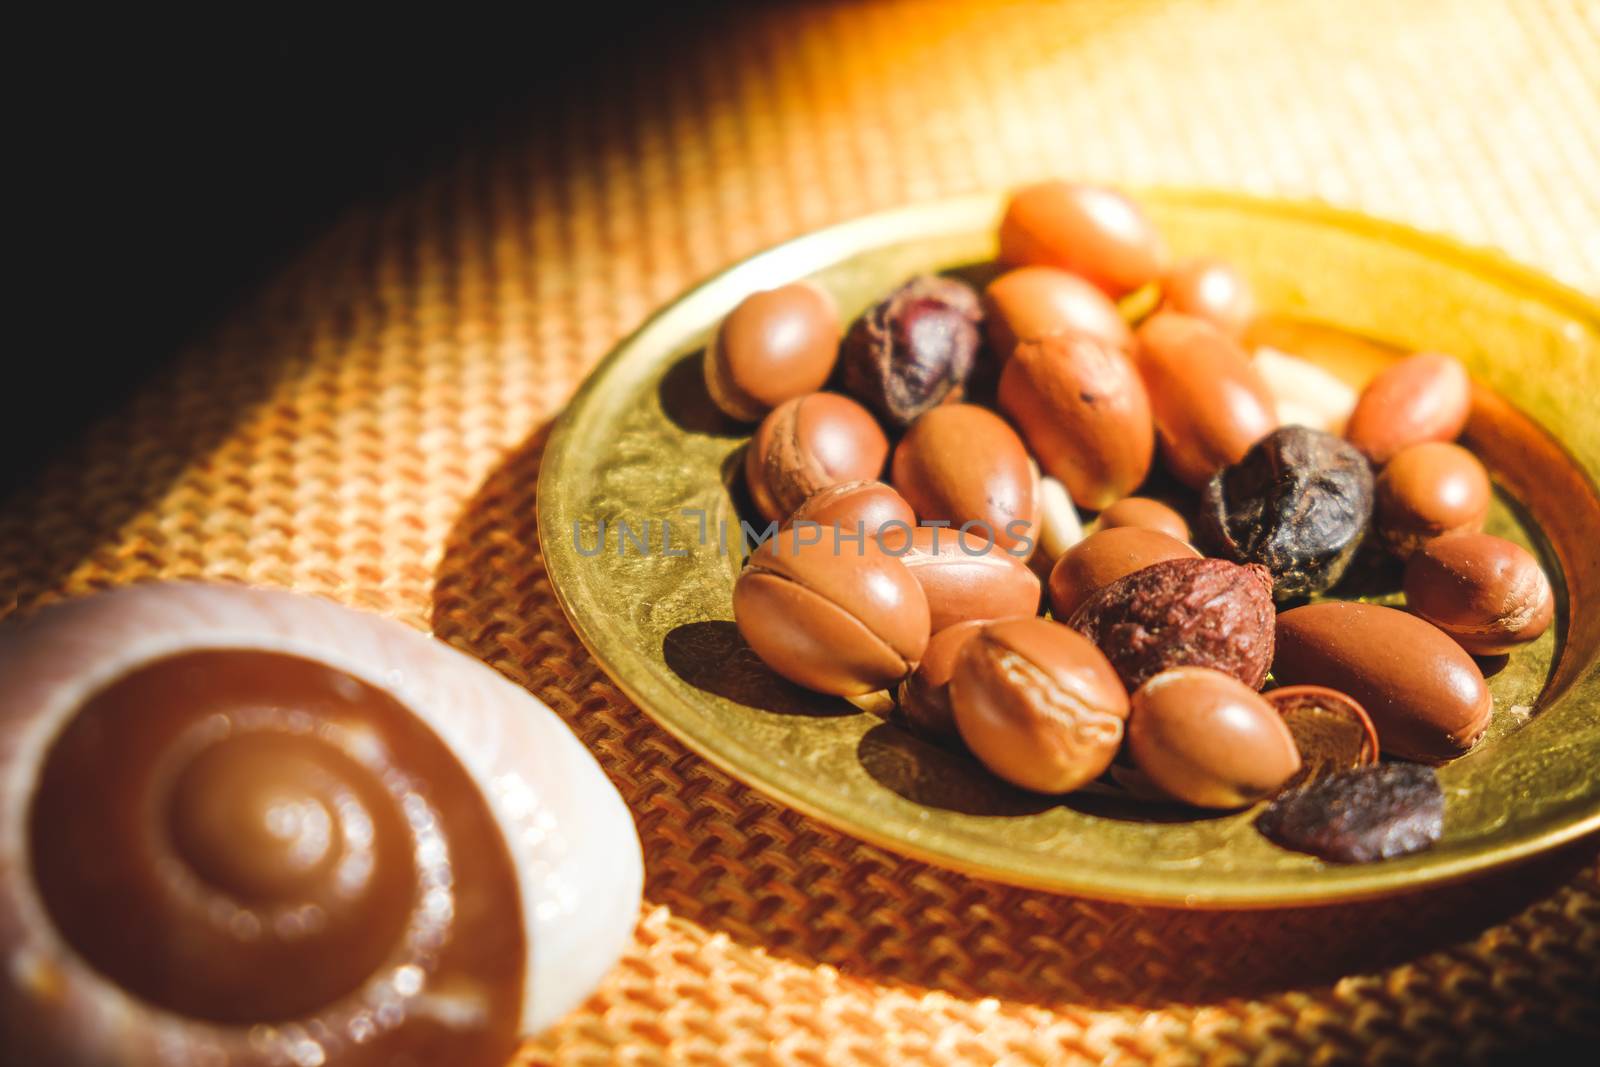 Argan nuts seeds on plate - Argan is an antioxidant used to produce oil for the skin by LucaLorenzelli